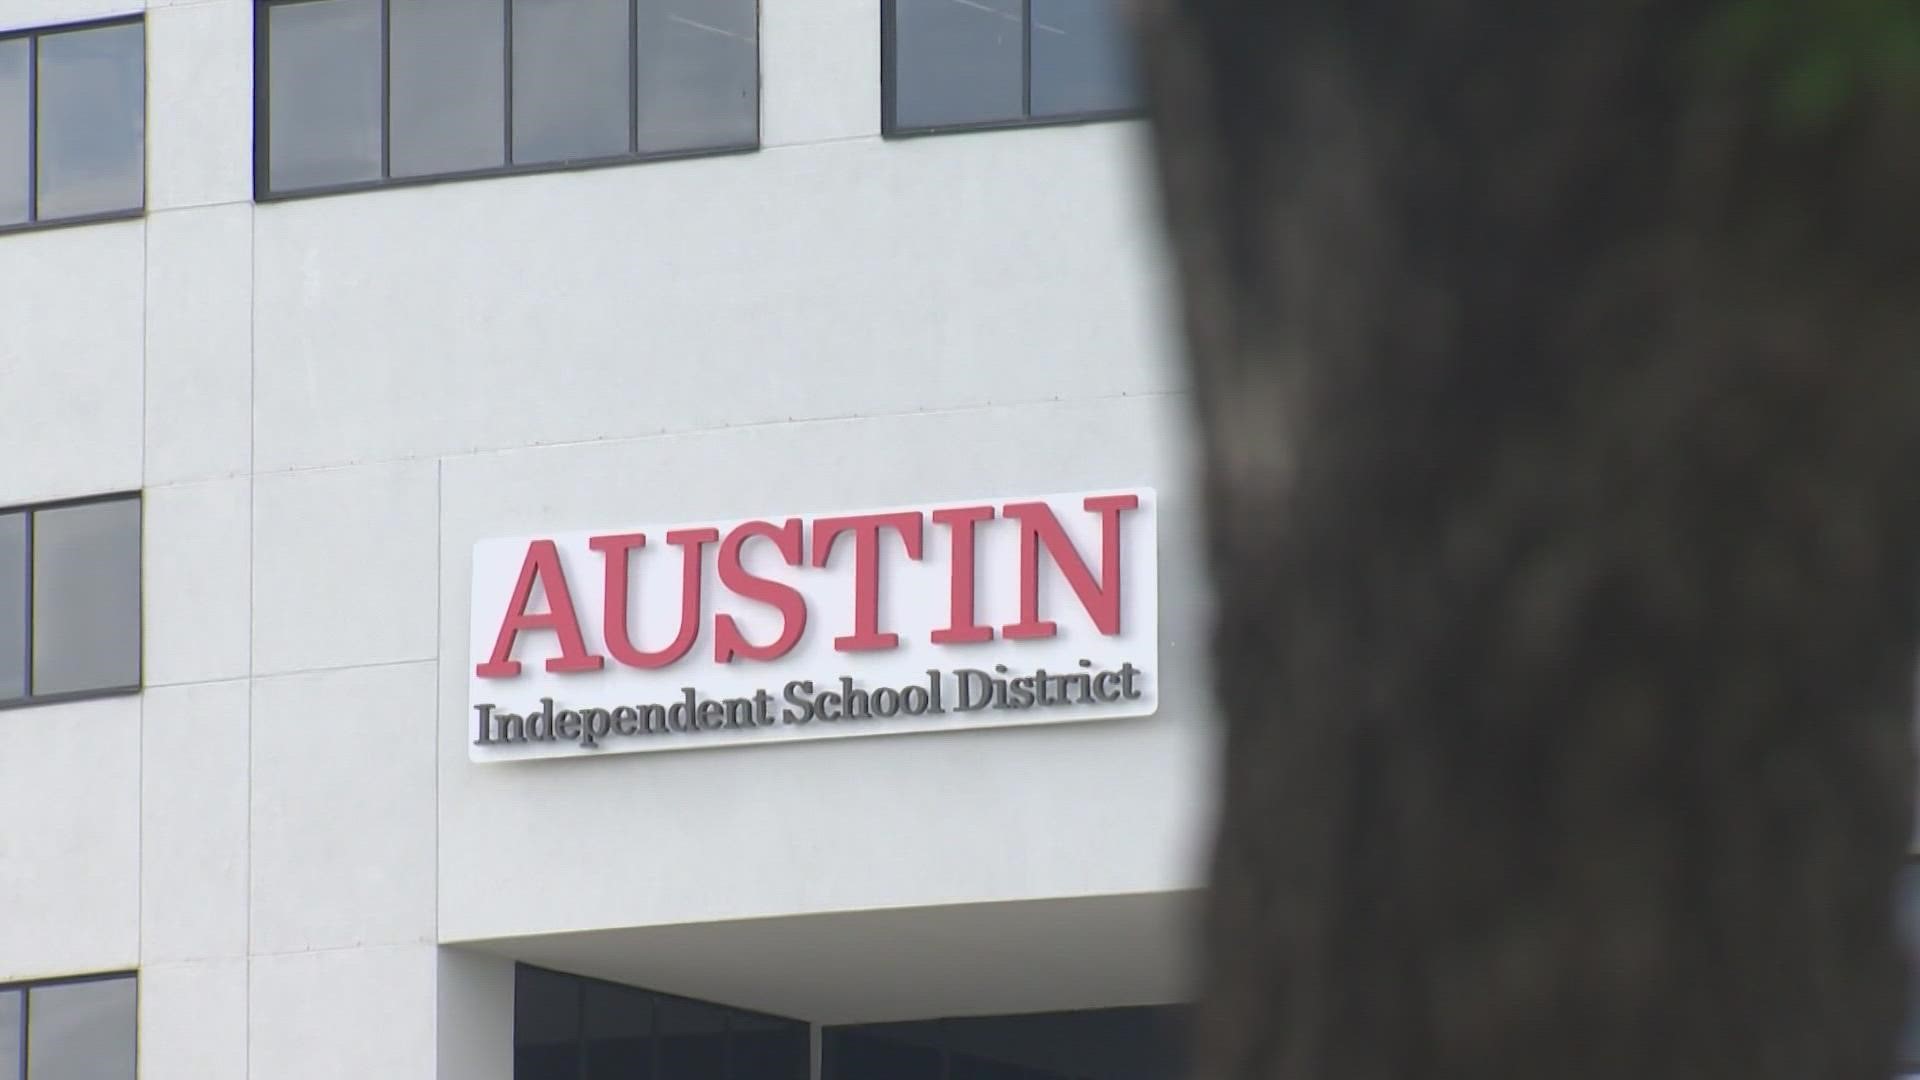 The application period for Austin ISD ends Thursday at midnight.